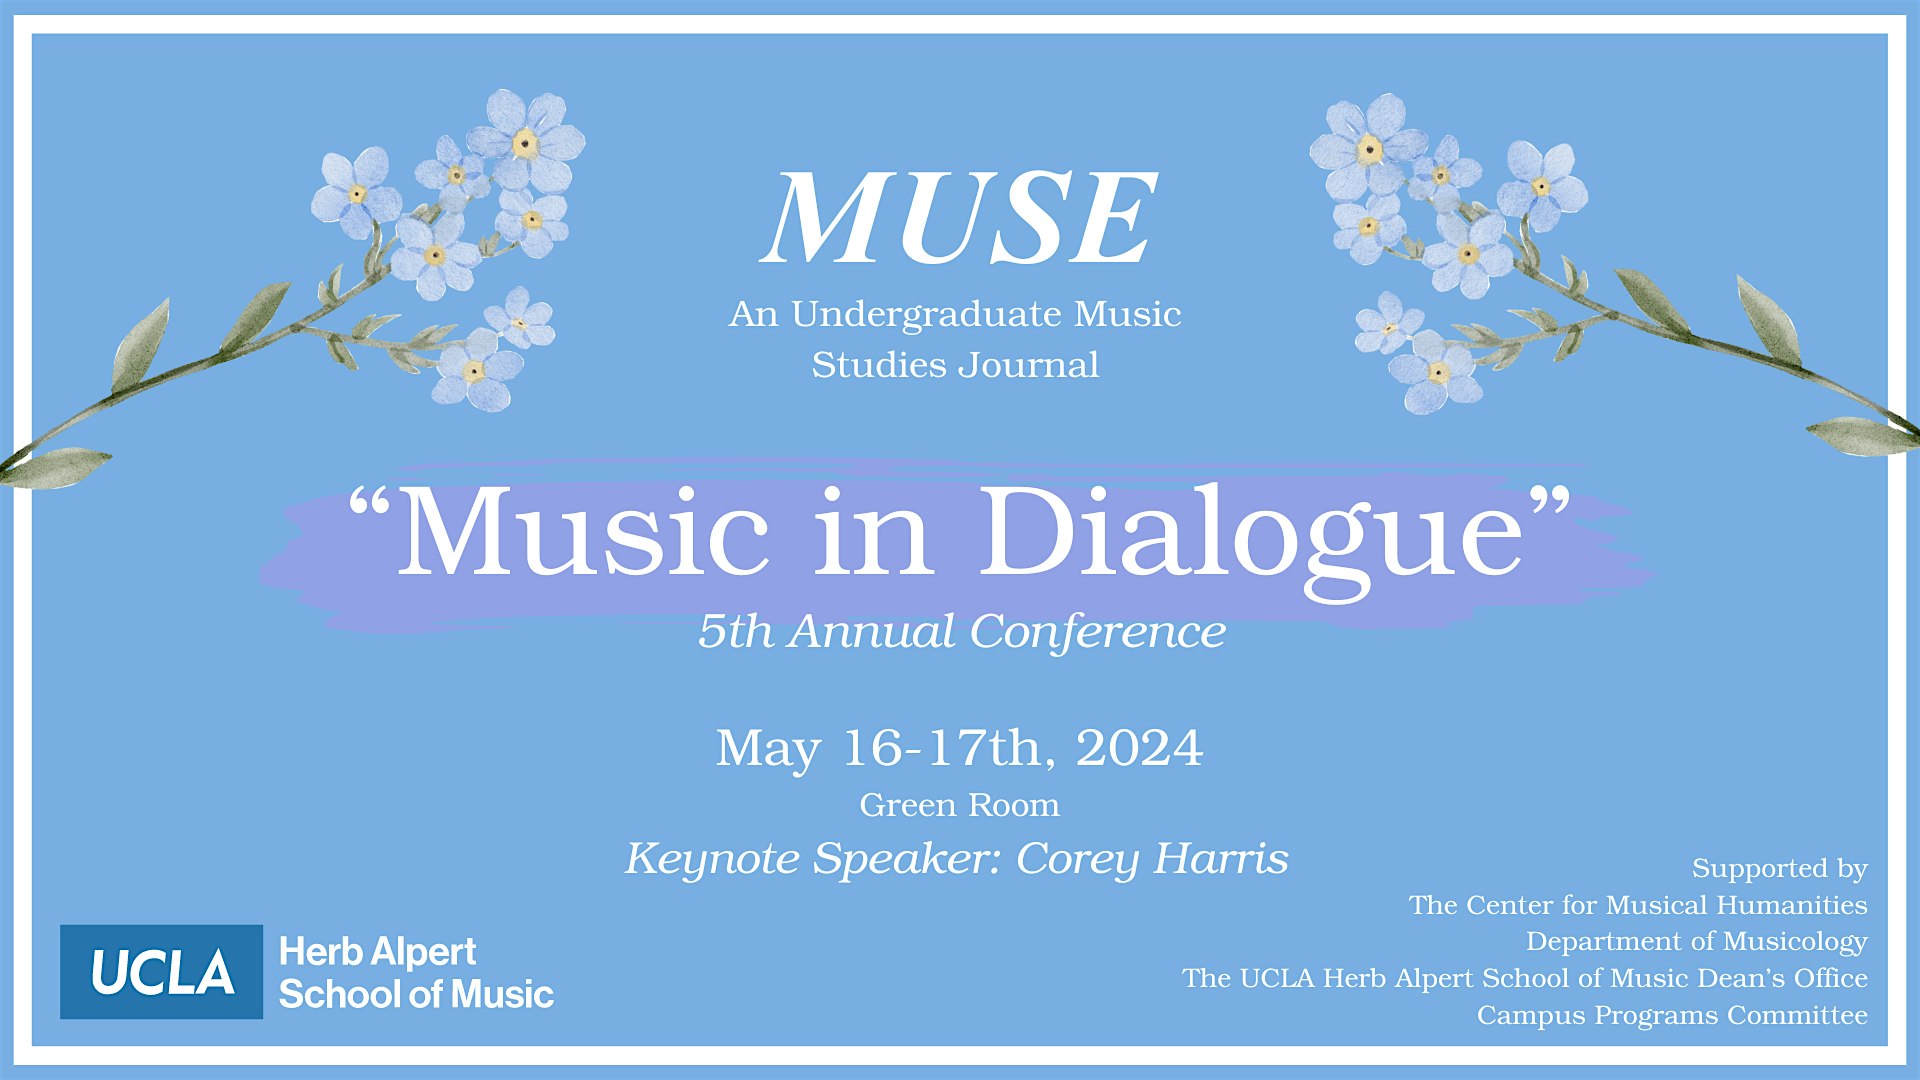 "Music in Dialogue" | MUSE 5th Annual Conference